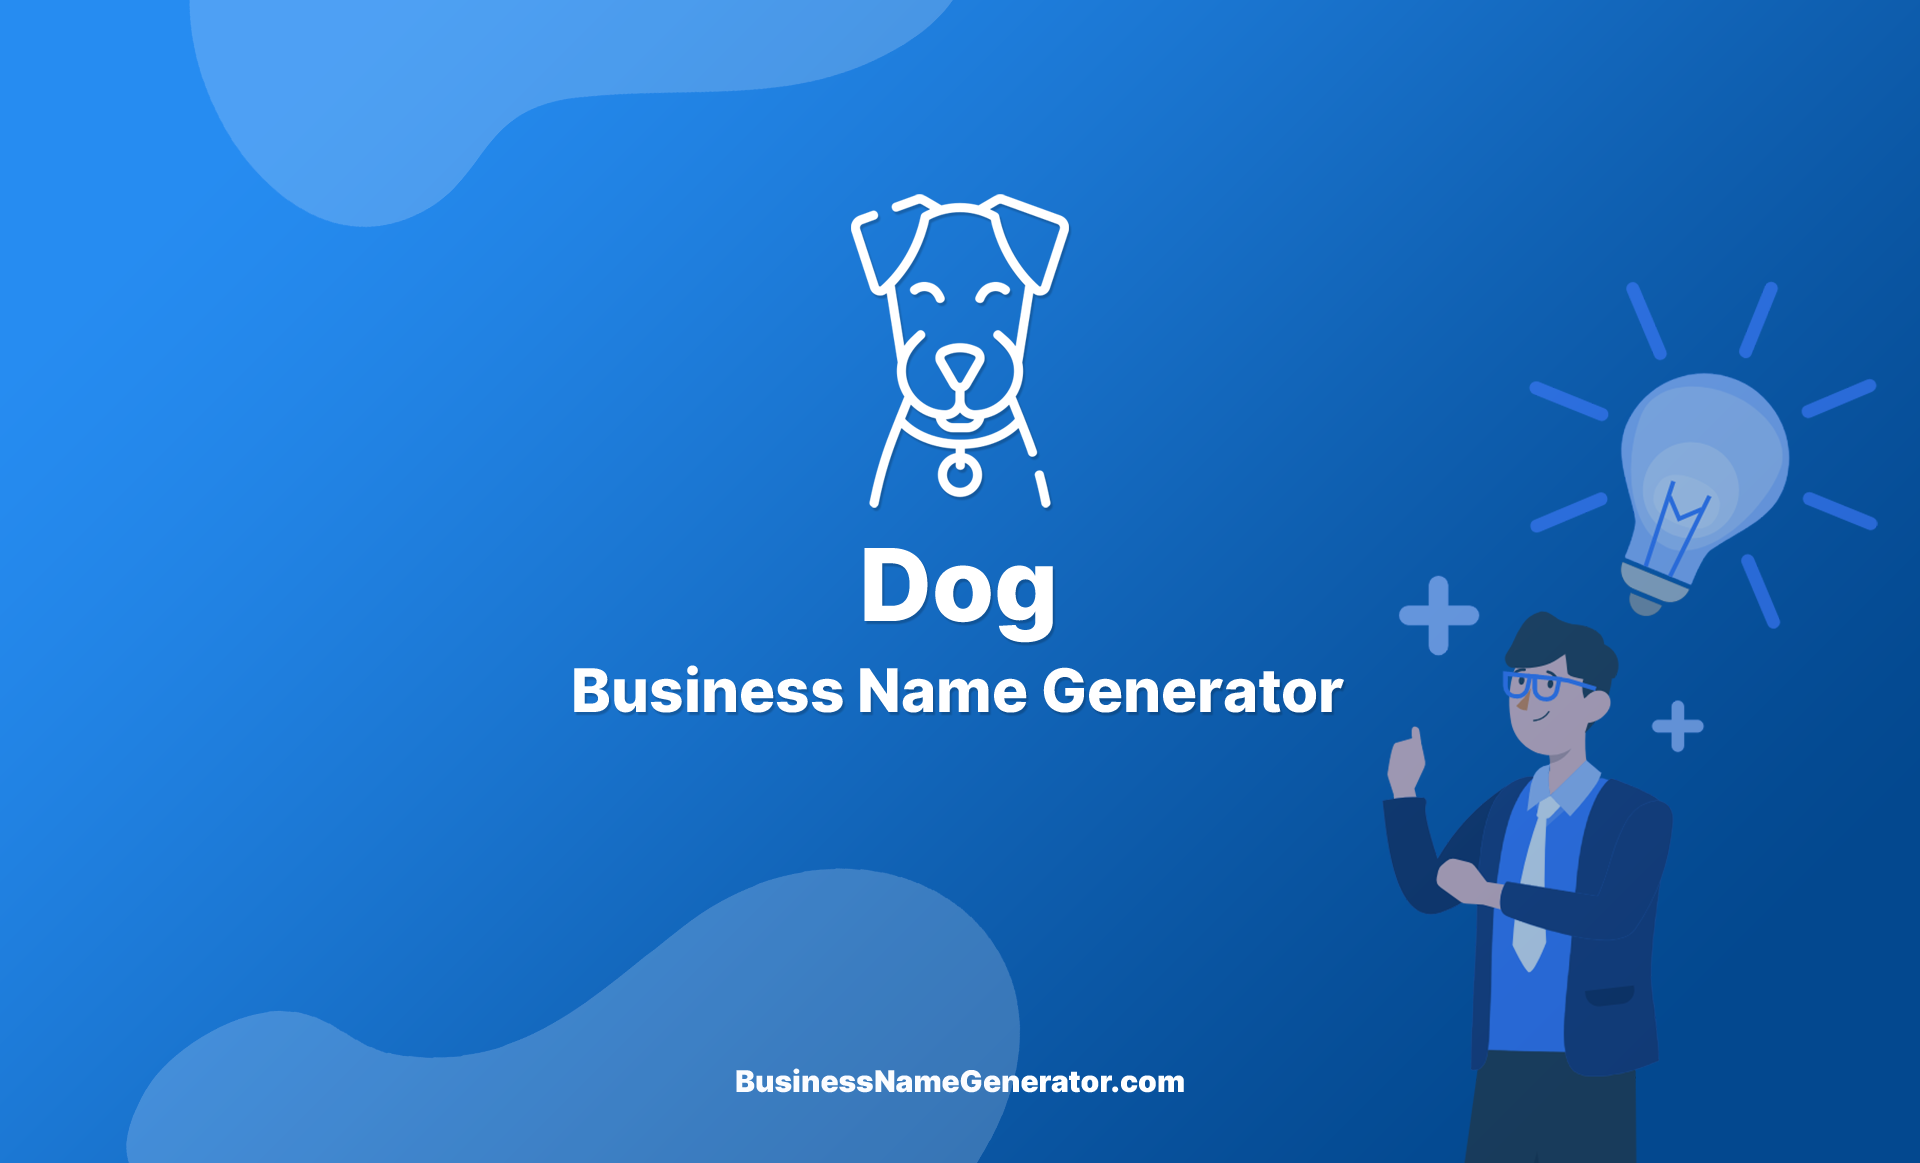 Dog Business Name Generator Guide & Ideas